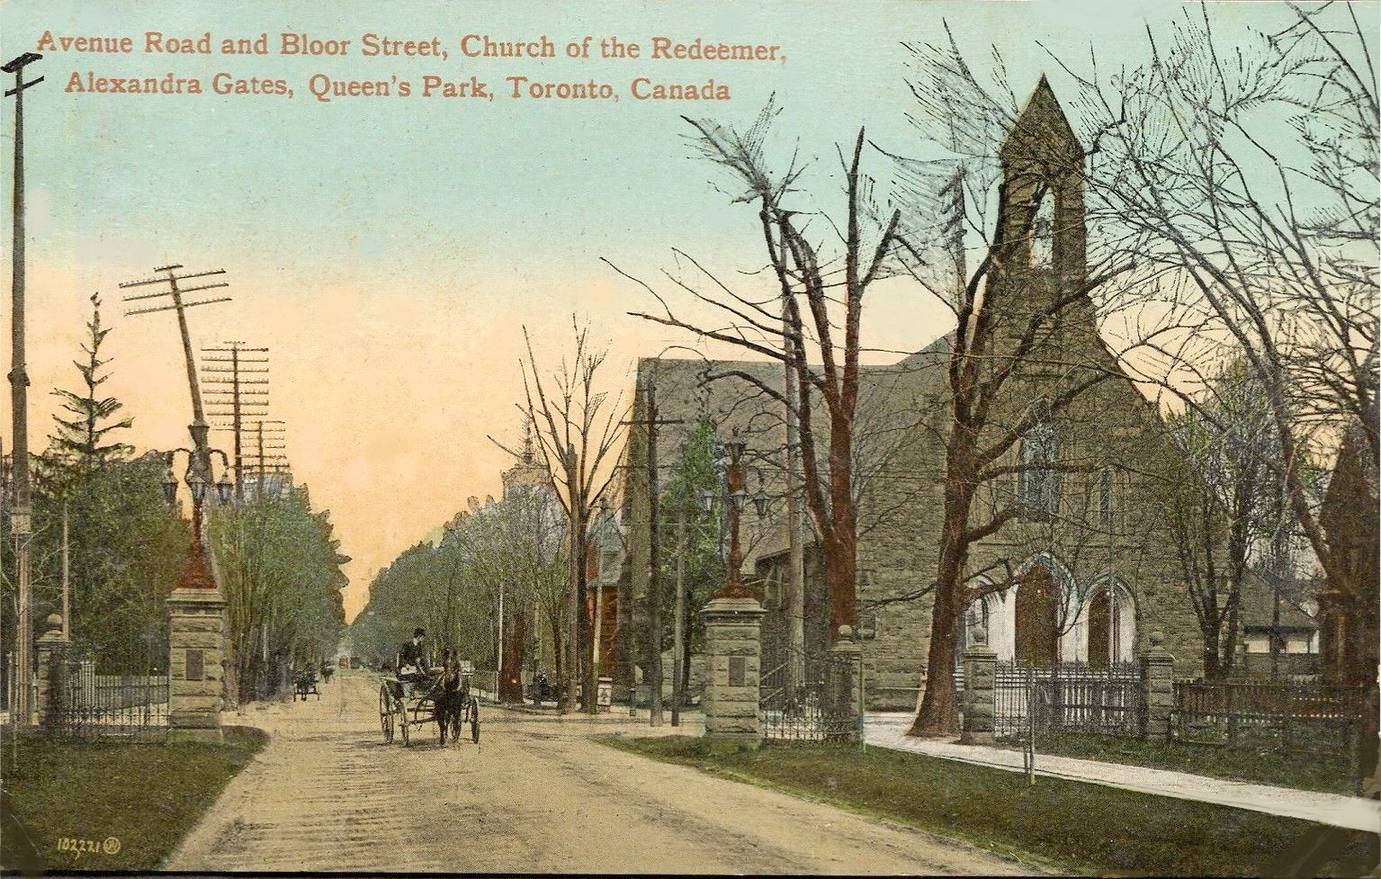 AA POSTCARD - TORONTO - AVENUE ROAD AND BLOOR - LOOKING N GROUND LEVEL - CHURCH OF THE REDEEMER - WAGONS AT ALEXANDRA GATES OF QUEEN'S PARK - TINTED - 1912